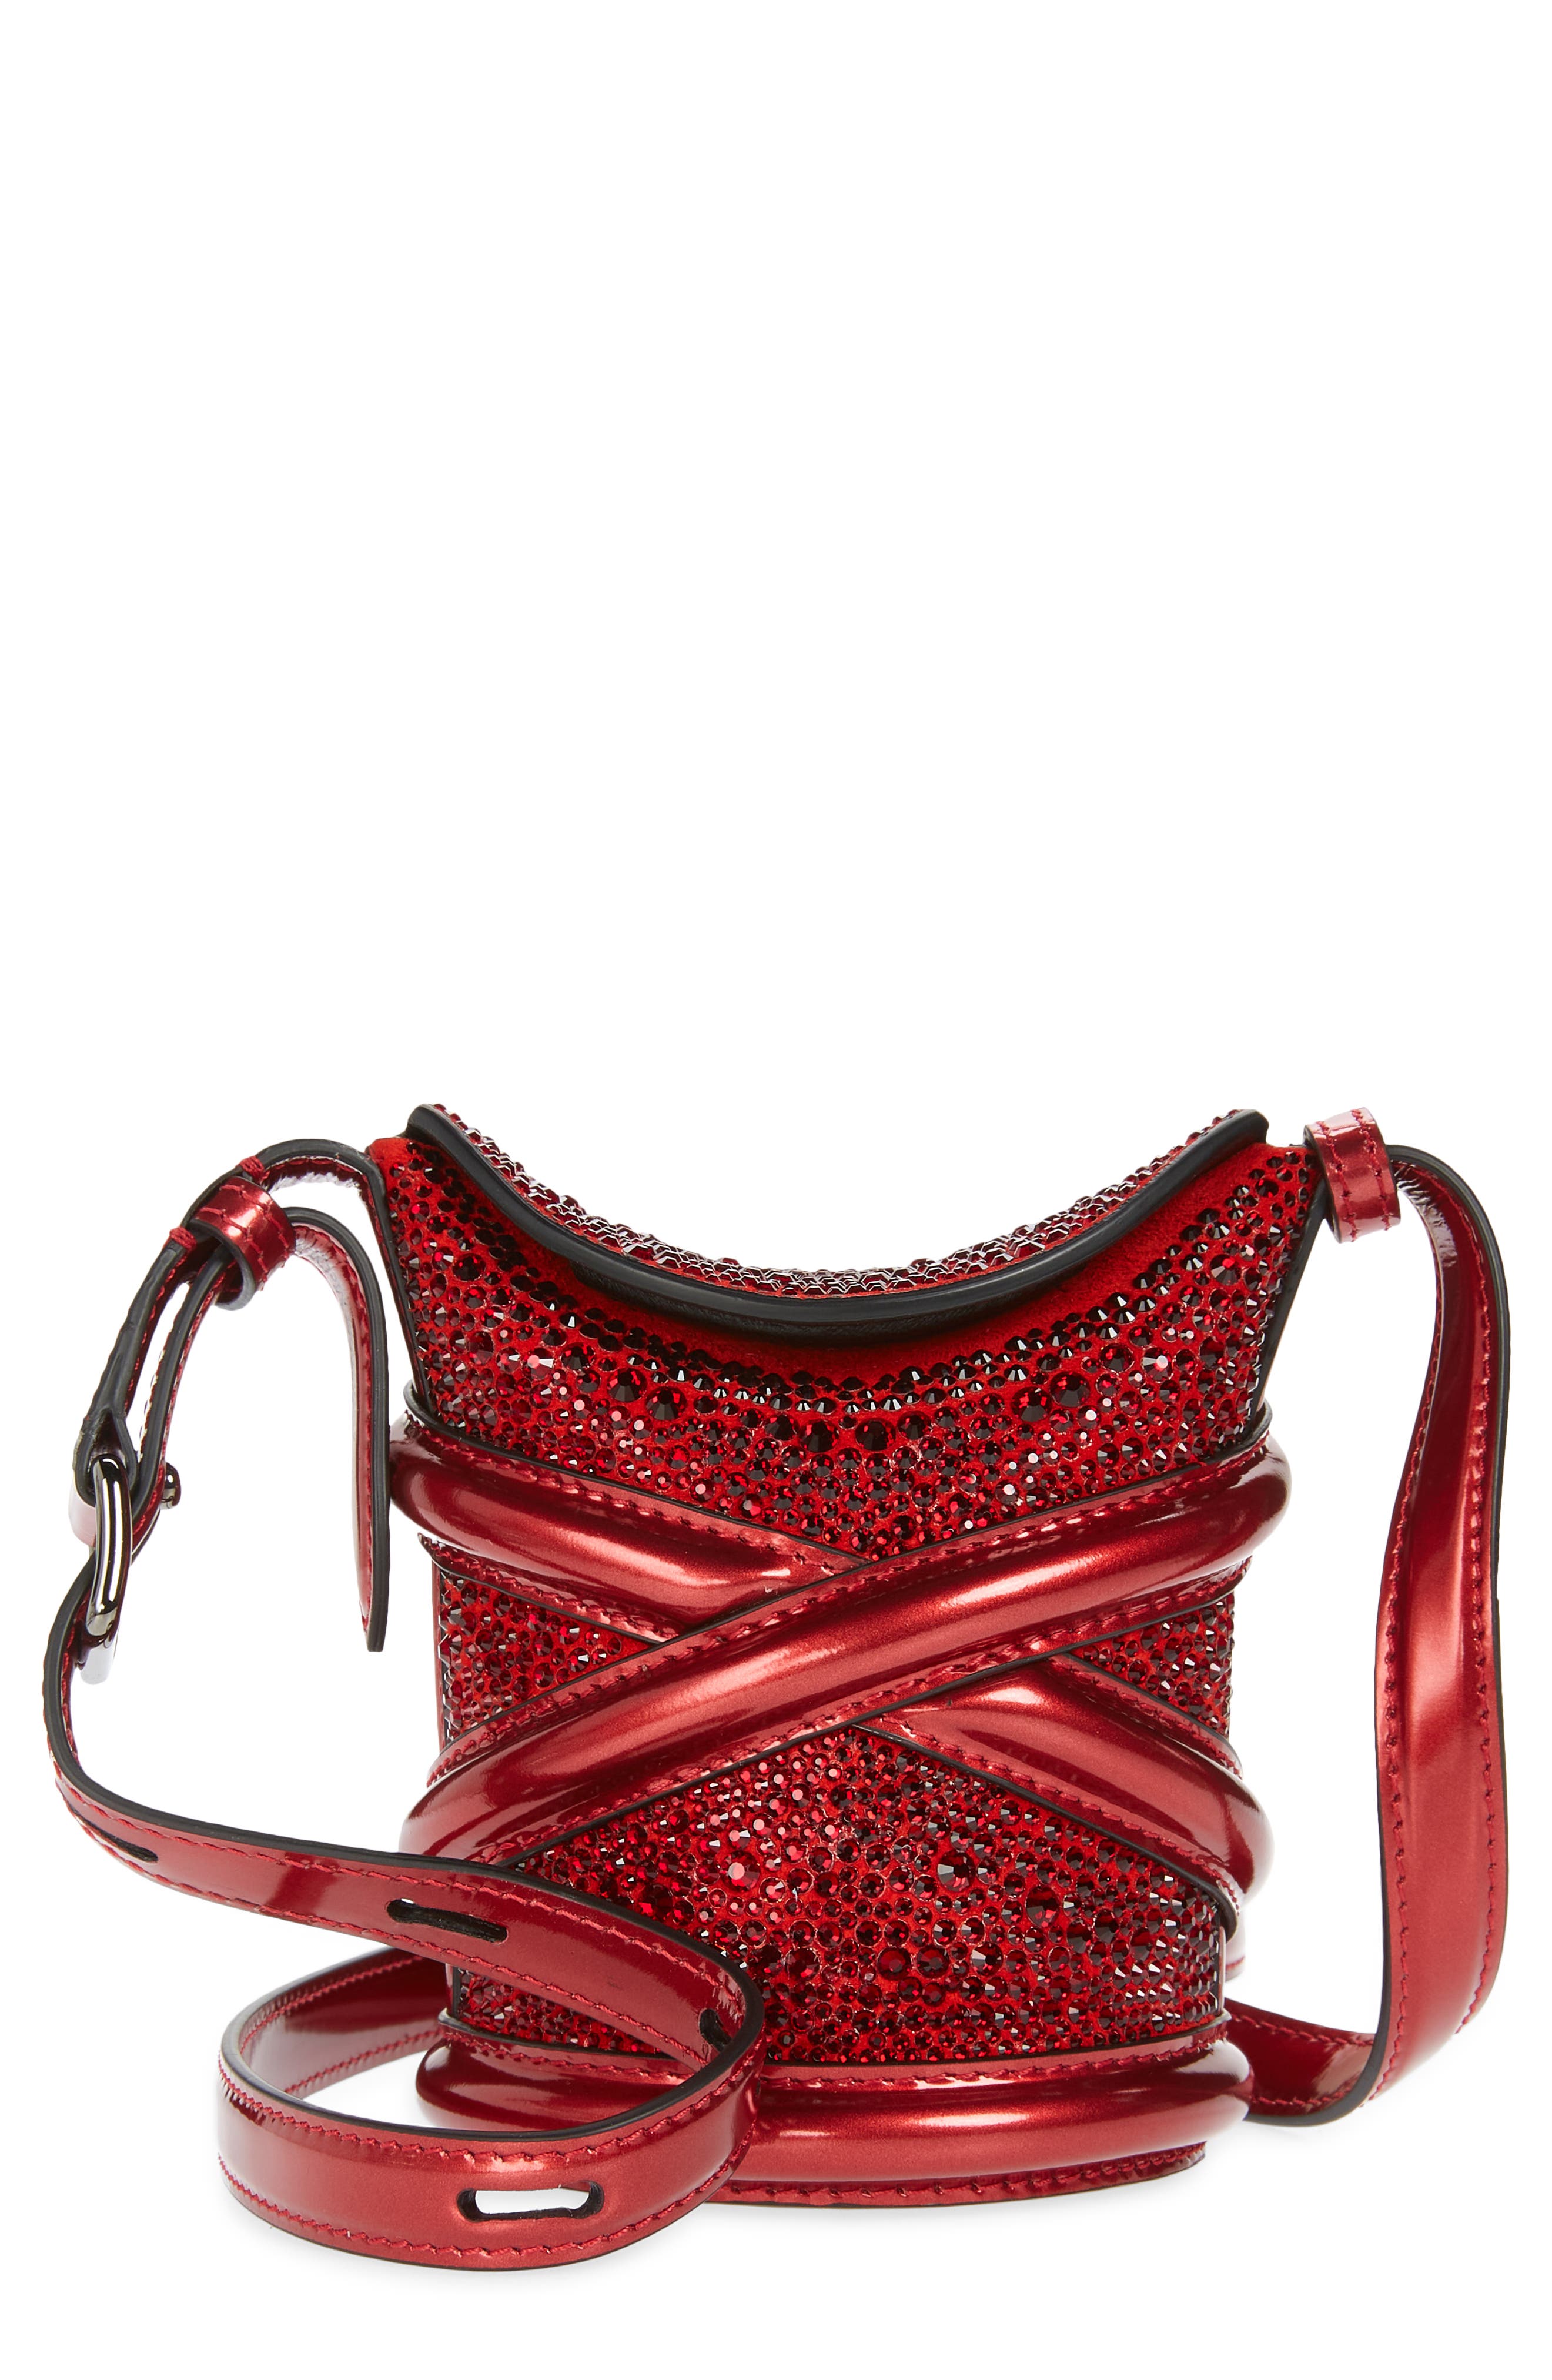 Alexander McQueen Micro The Curve Crystal Embellished Leather Crossbody Bag in Red at Nordstrom